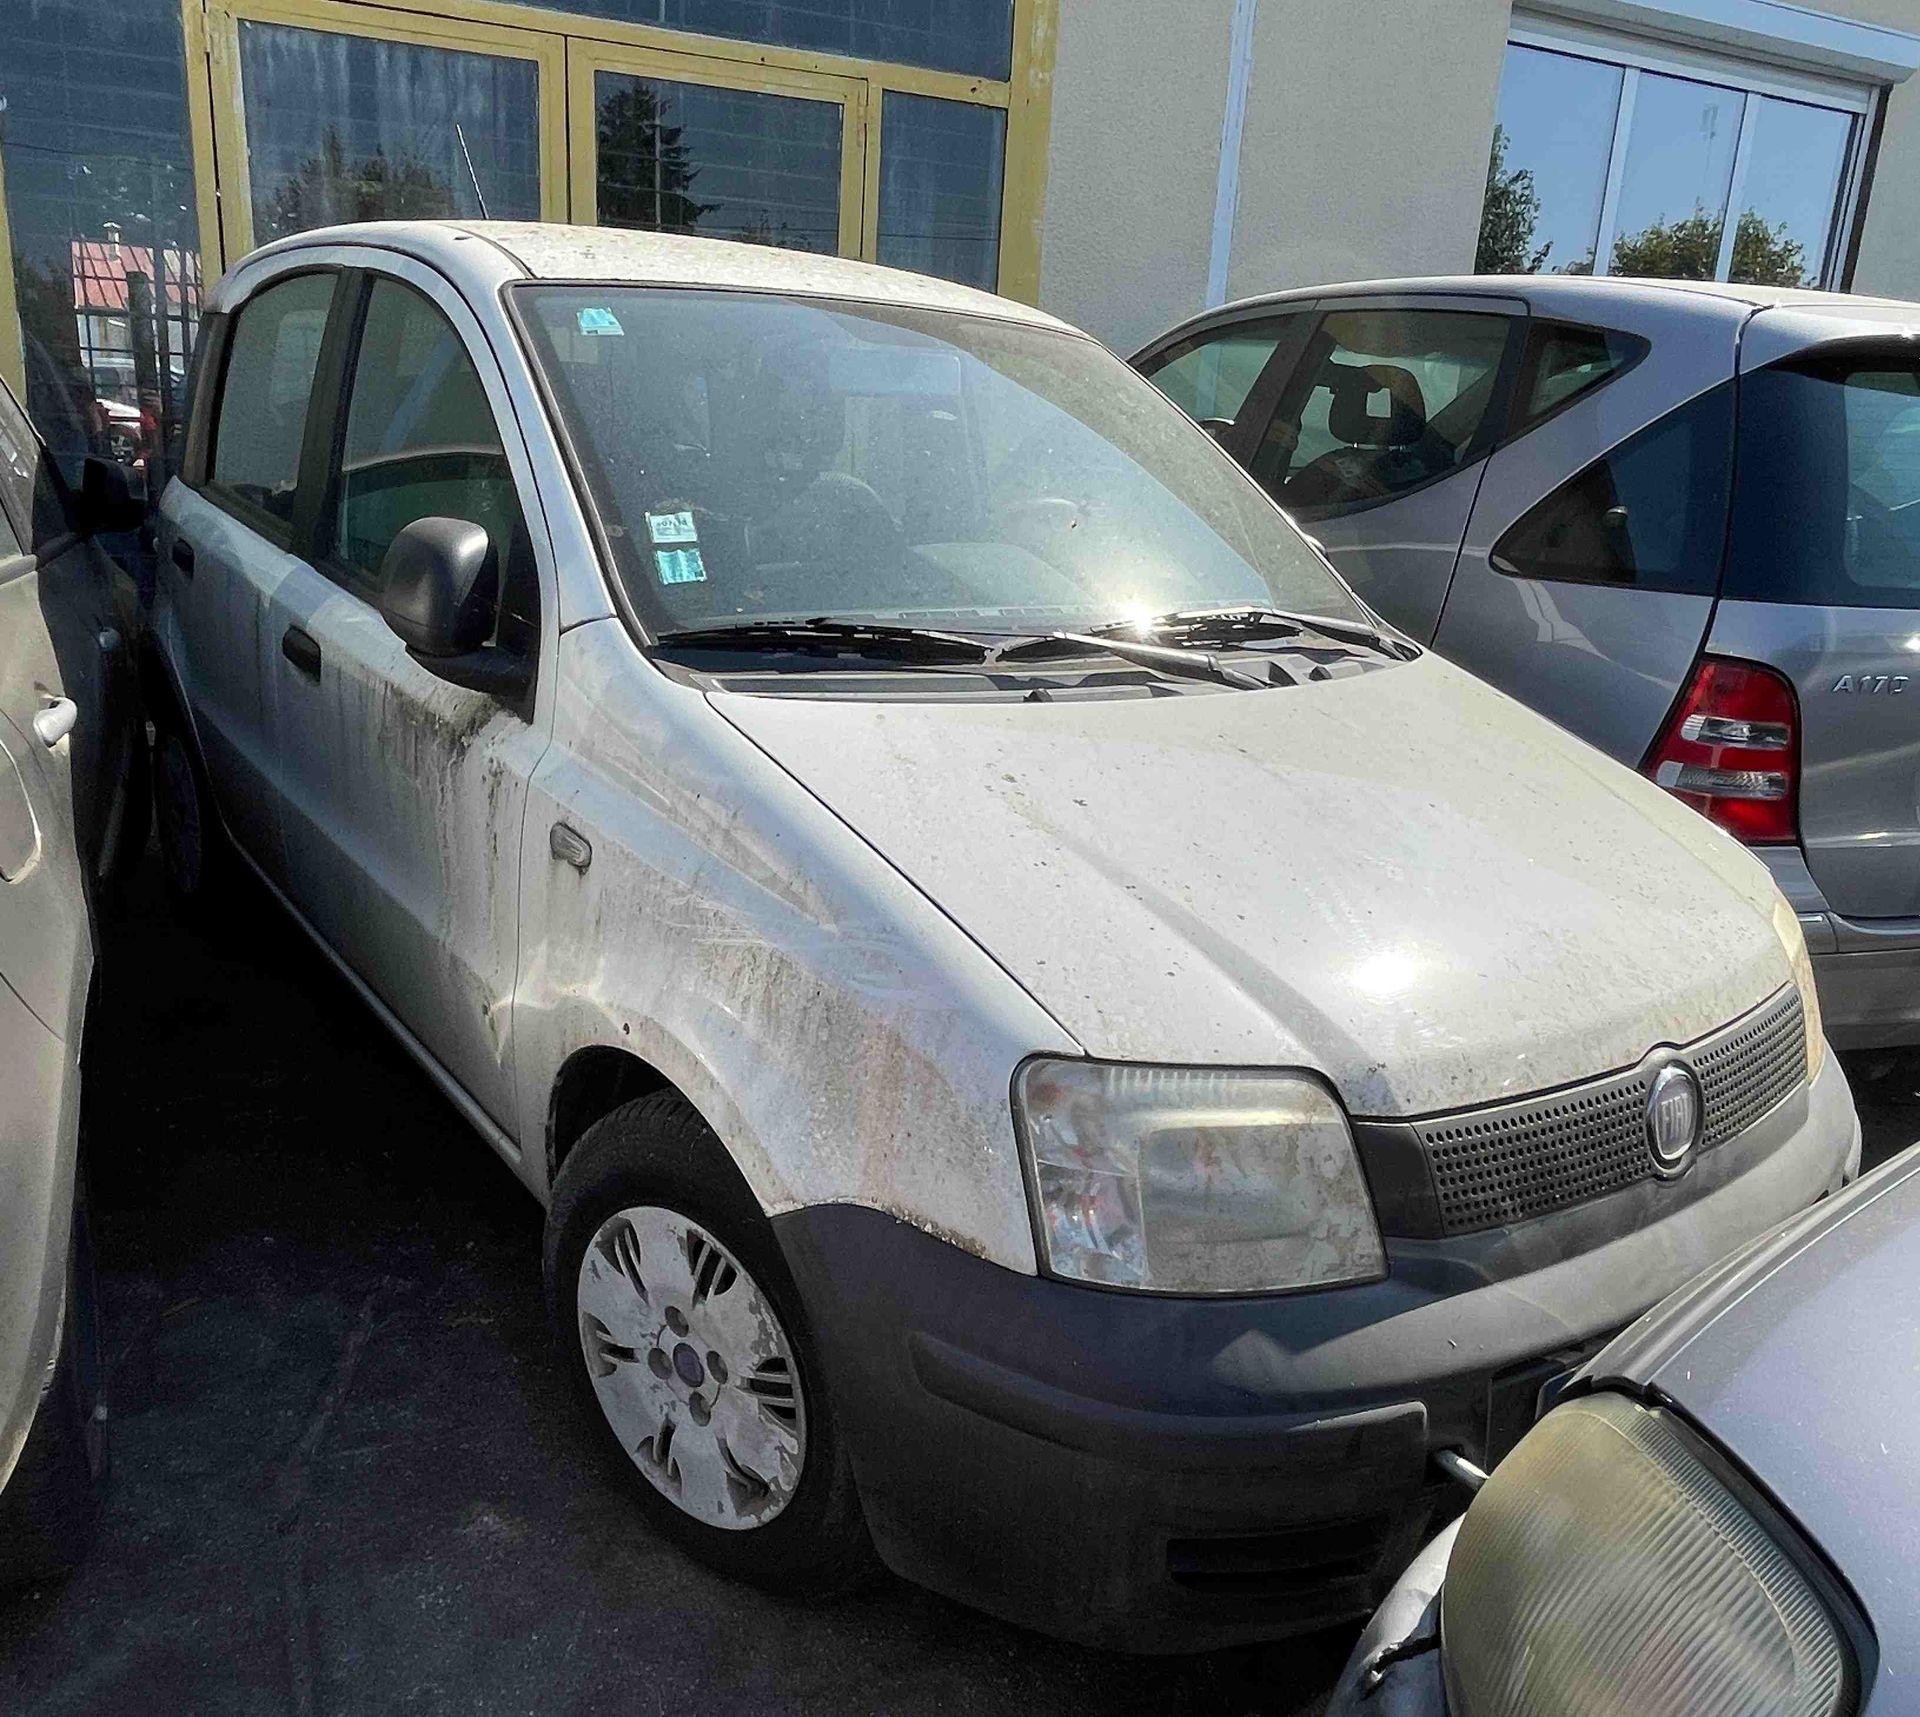 Null [RP][ACI] Reserved for automotive professionals.
FIAT Panda 1.2 i 69, Petro&hellip;